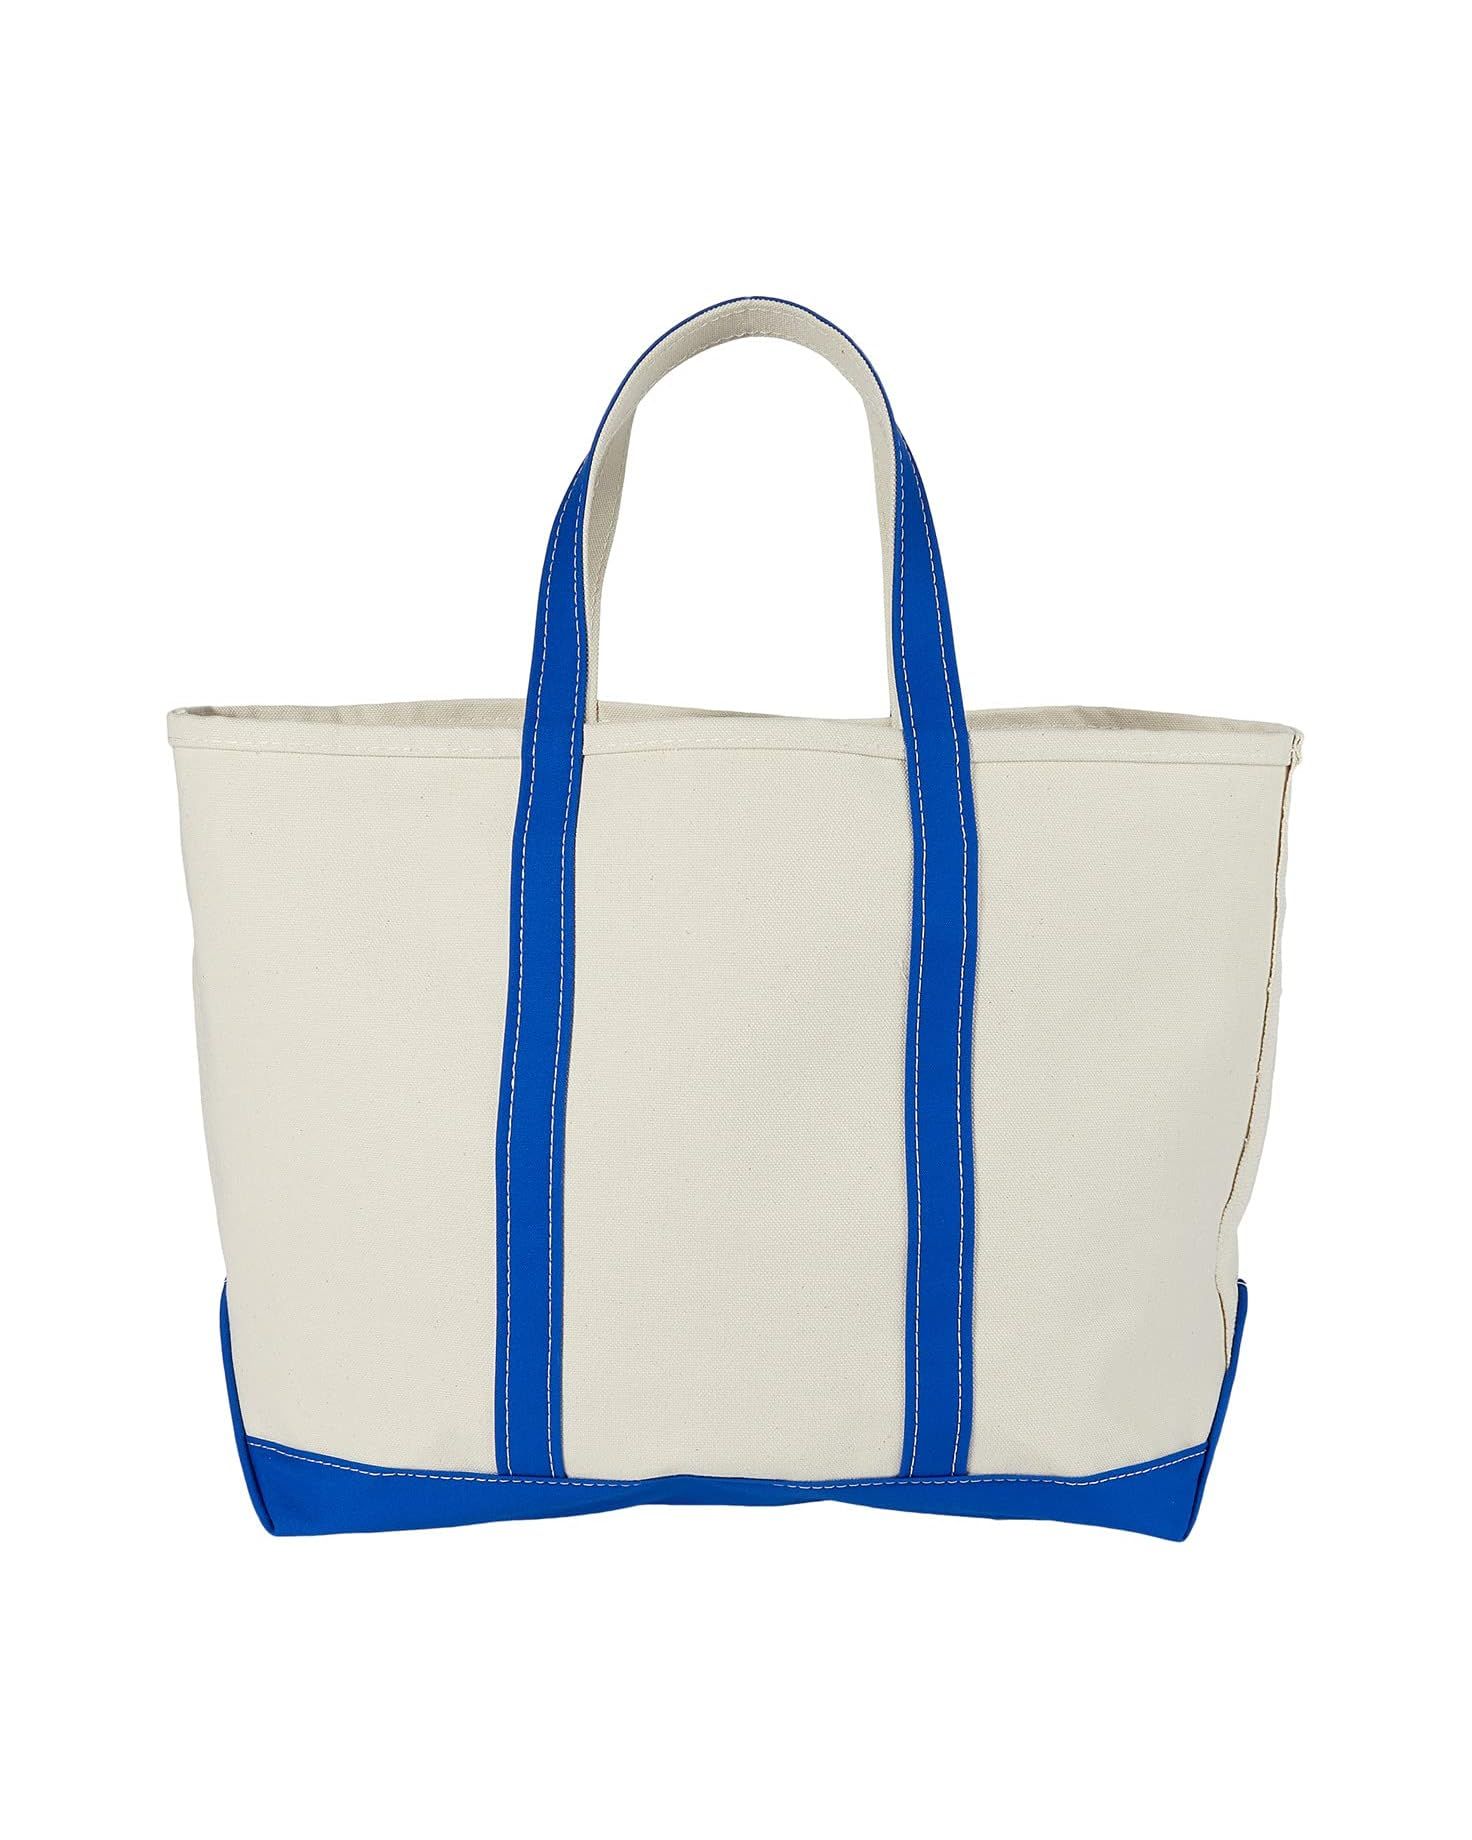 Boat and Tote Large | Zappos